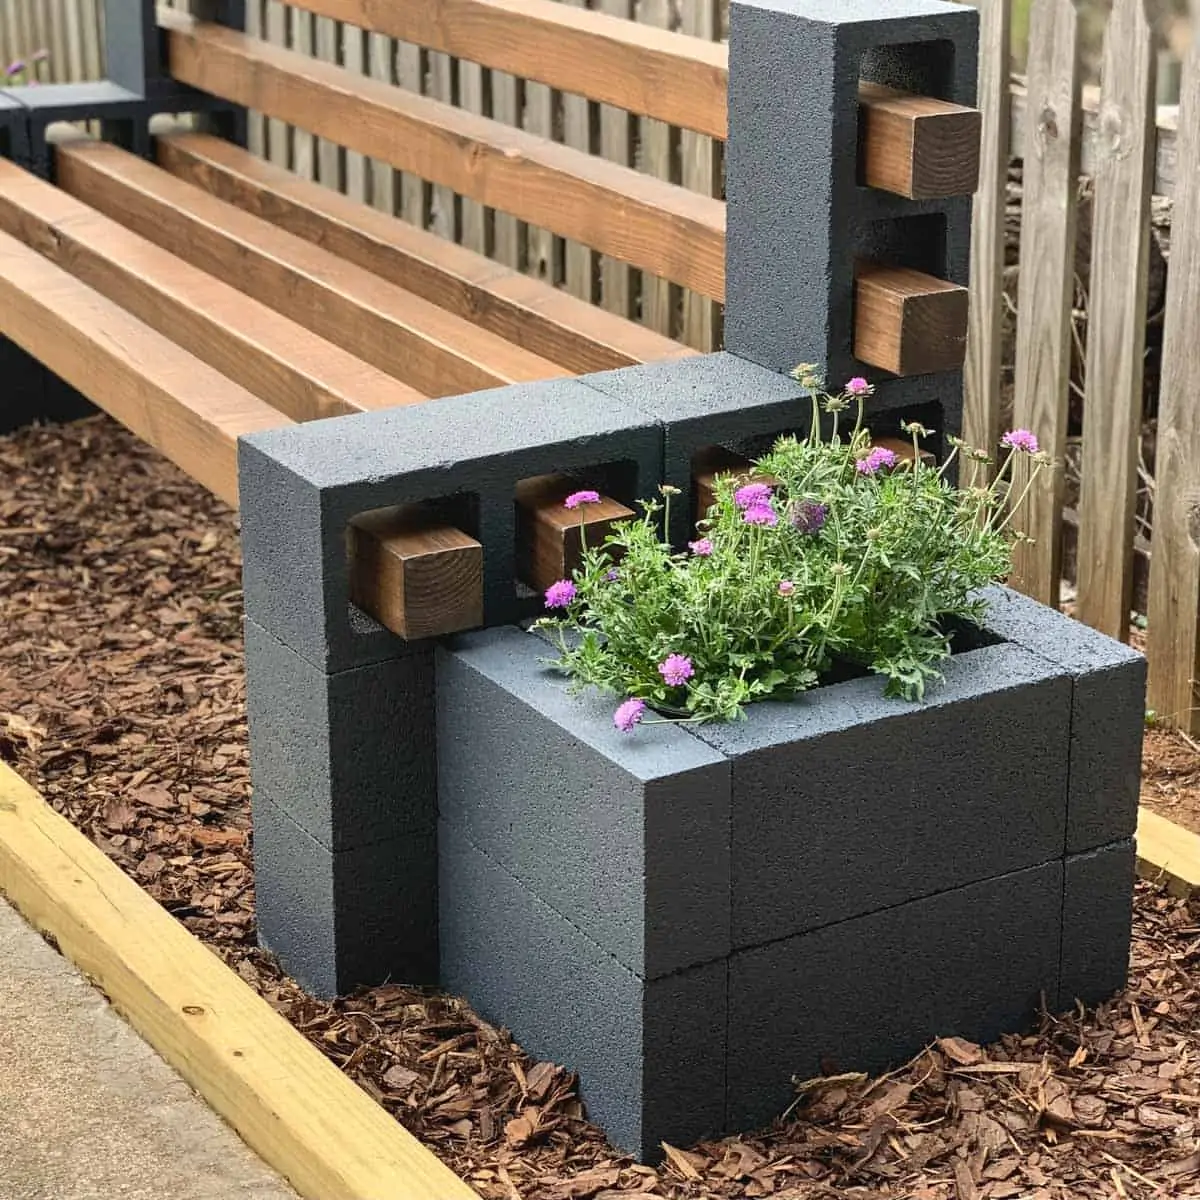 blue planter box made with concrete blocks butting up against wood and cinder block bench. Has purple flowers inside.